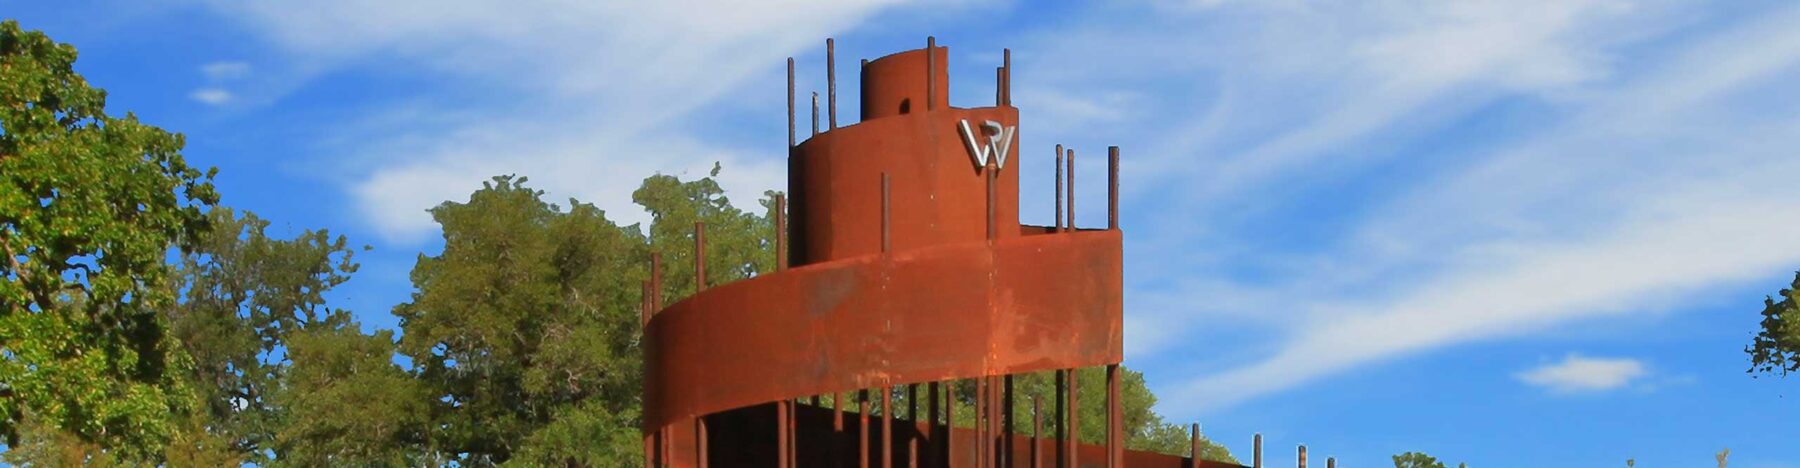 A public sculpture at Wolf Ranch by Hillwood